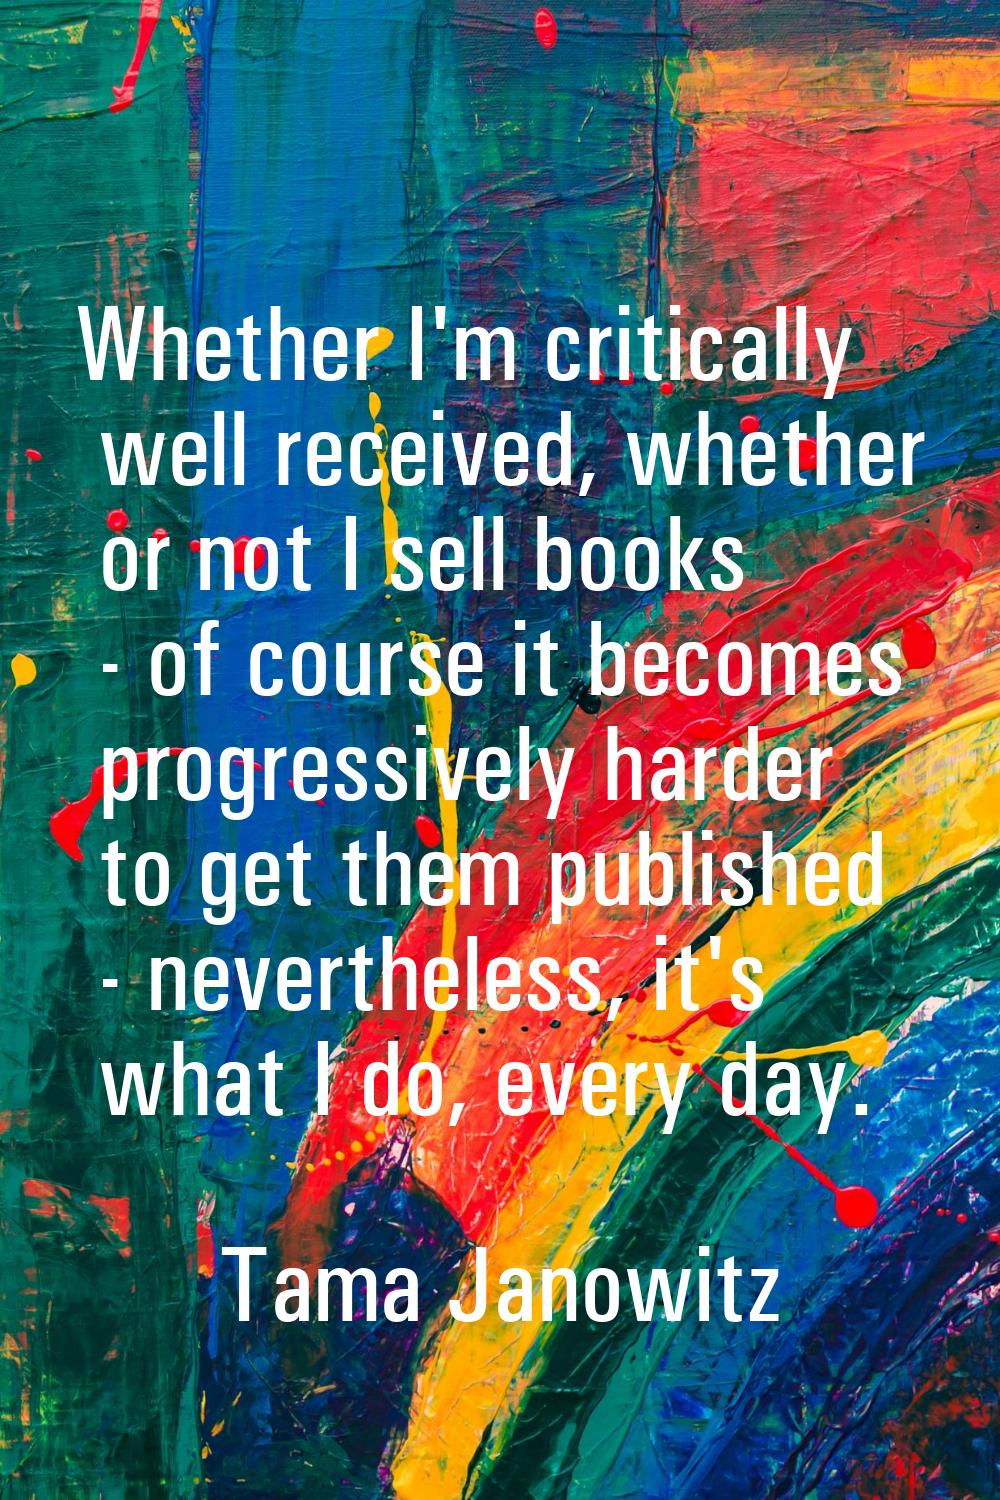 Whether I'm critically well received, whether or not I sell books - of course it becomes progressiv